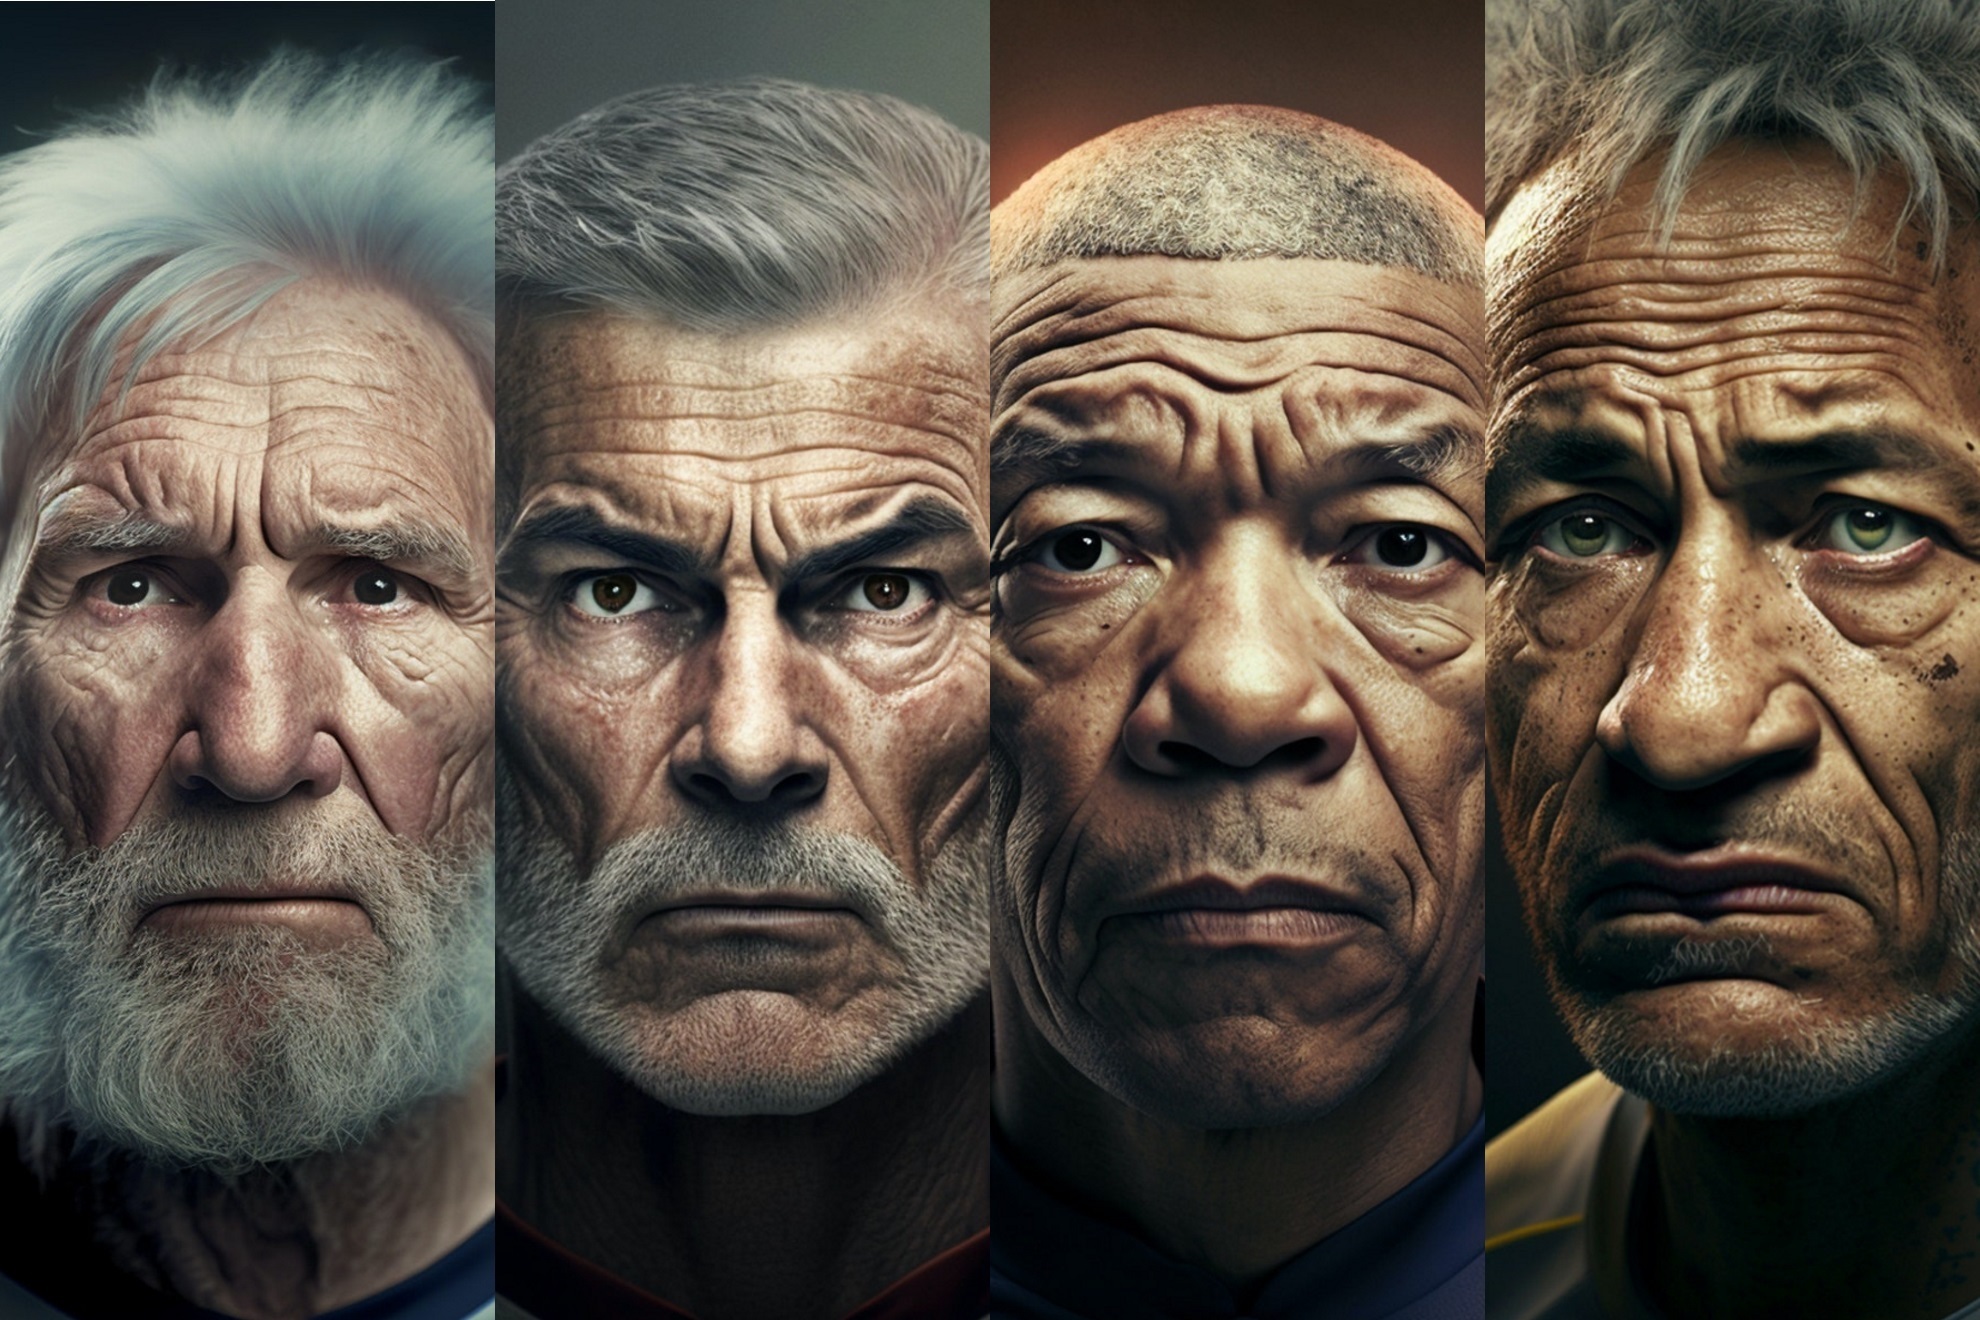 Messi, Cristiano Ronaldo, Mbappe, Neymar... when they're old! This is how the greatest footballers will look when they are seniors